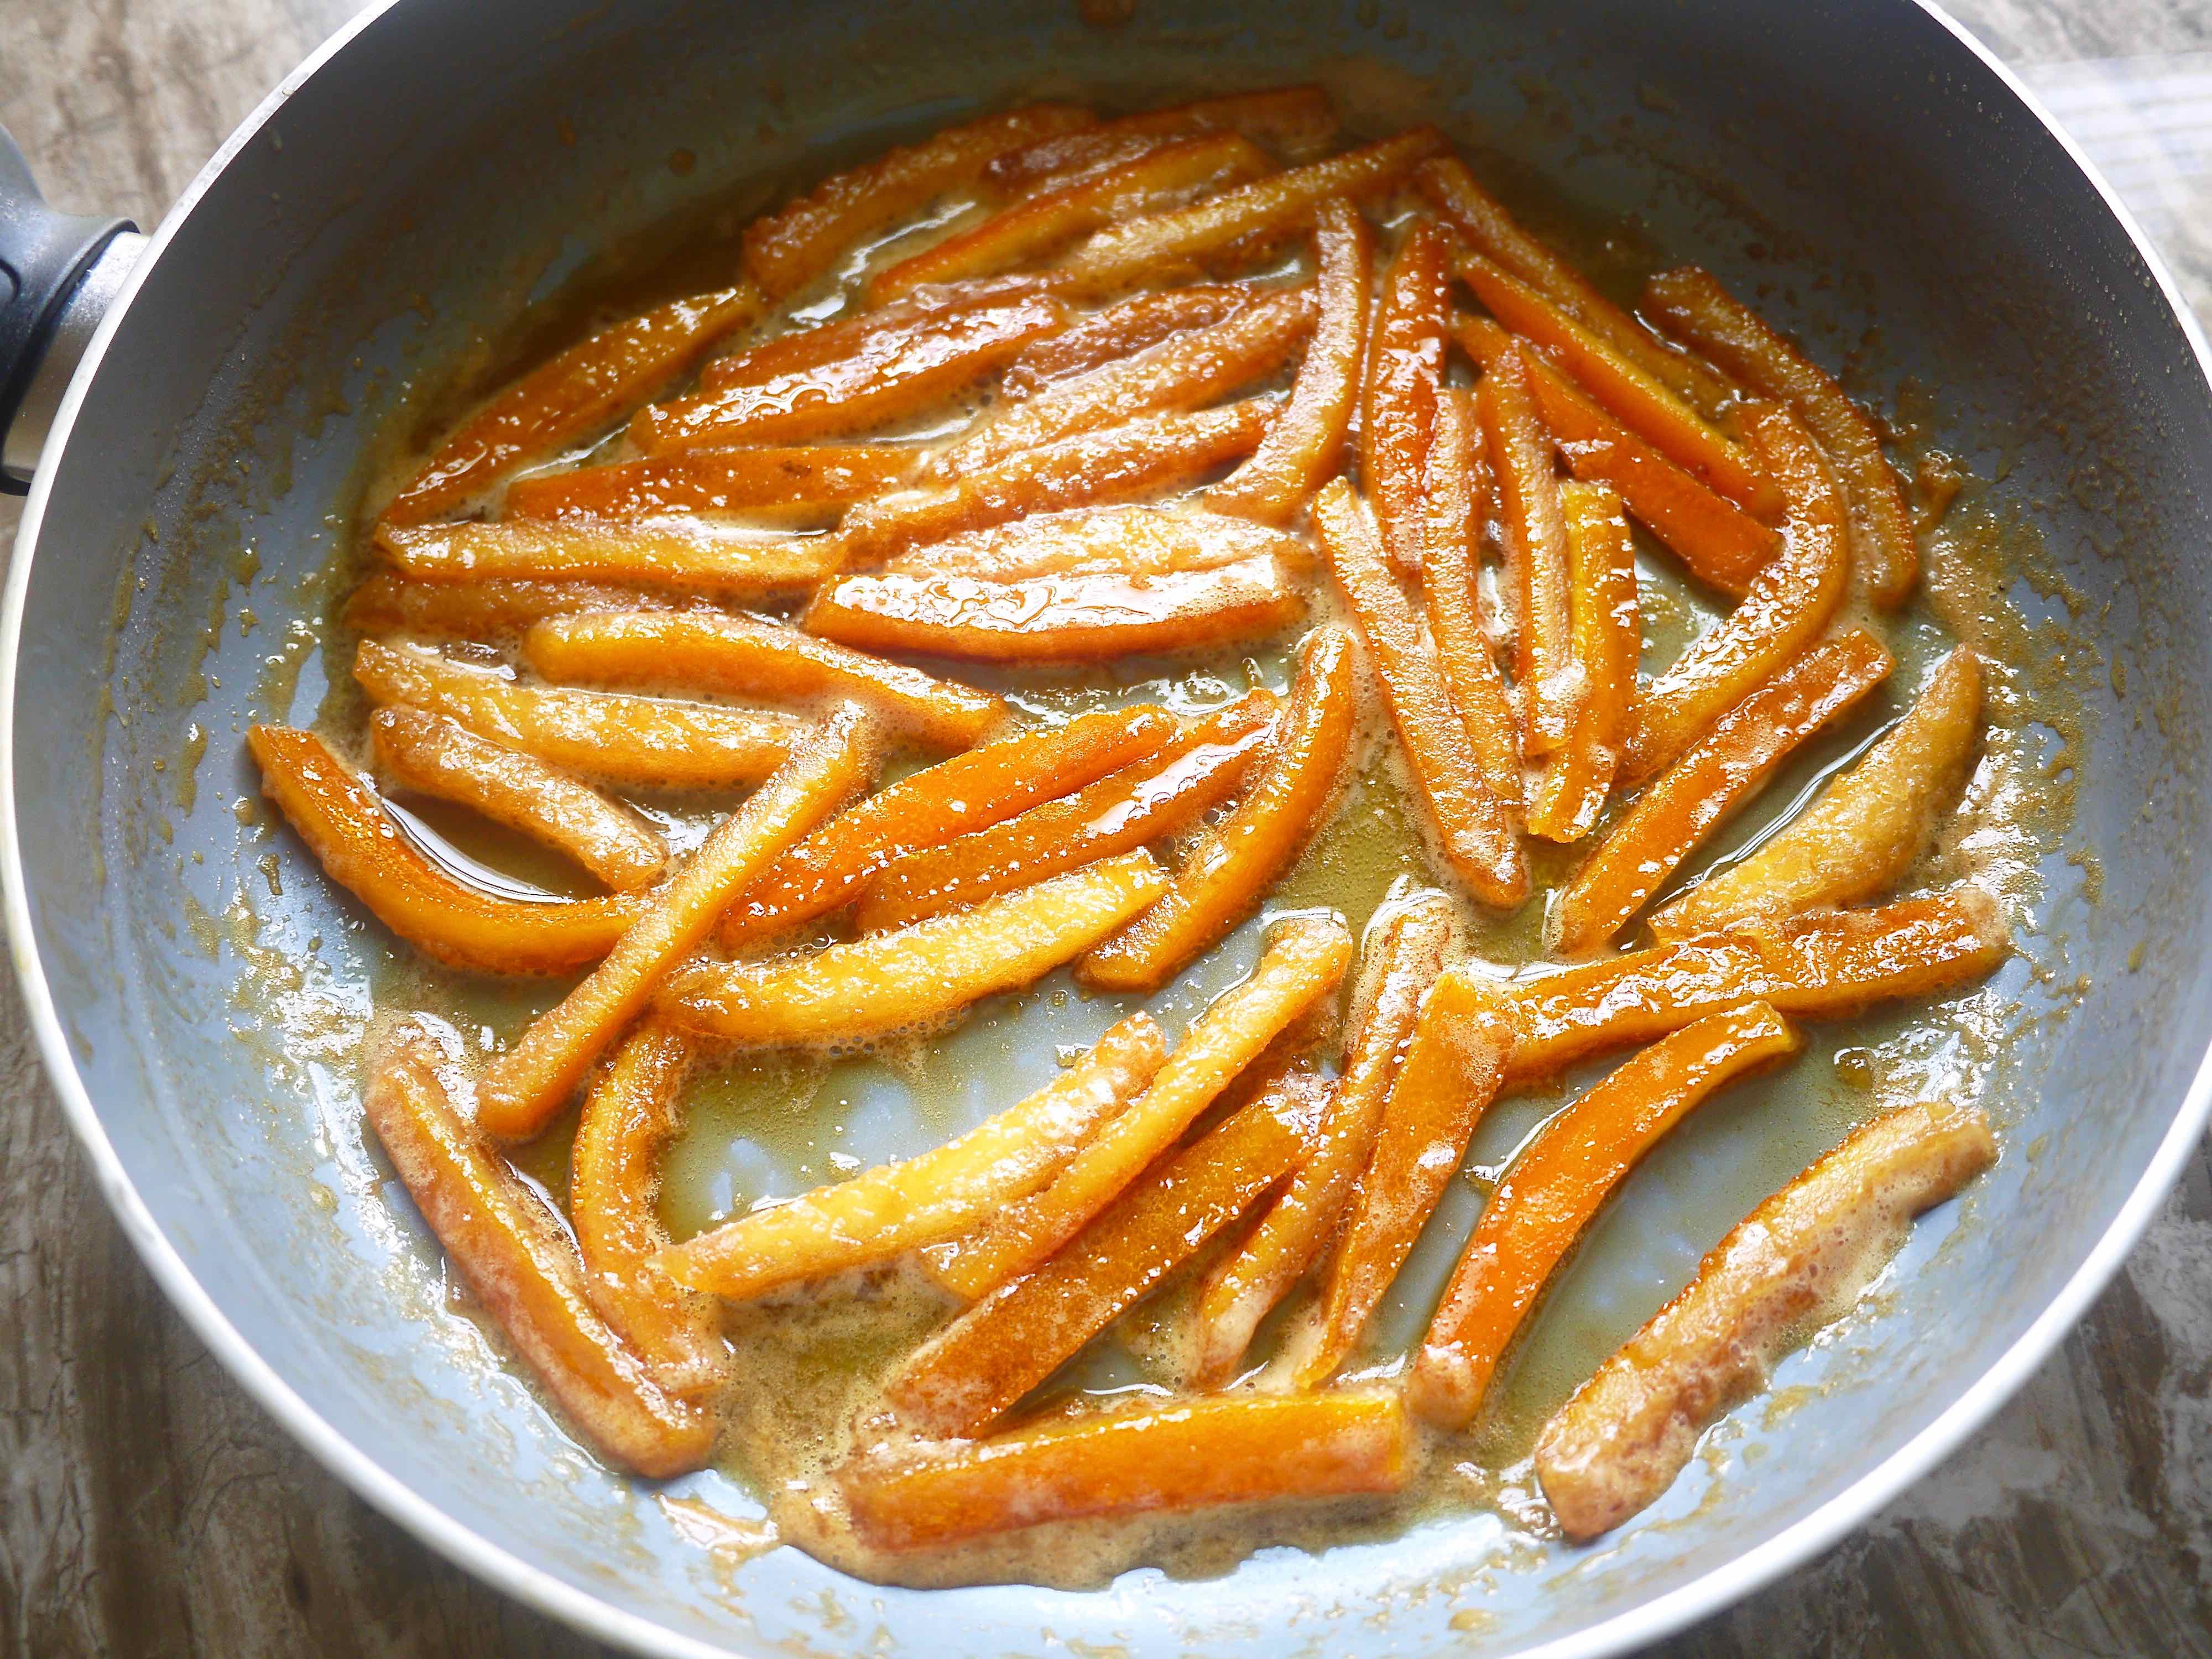 Orange peels in a pan covered in honey and water.